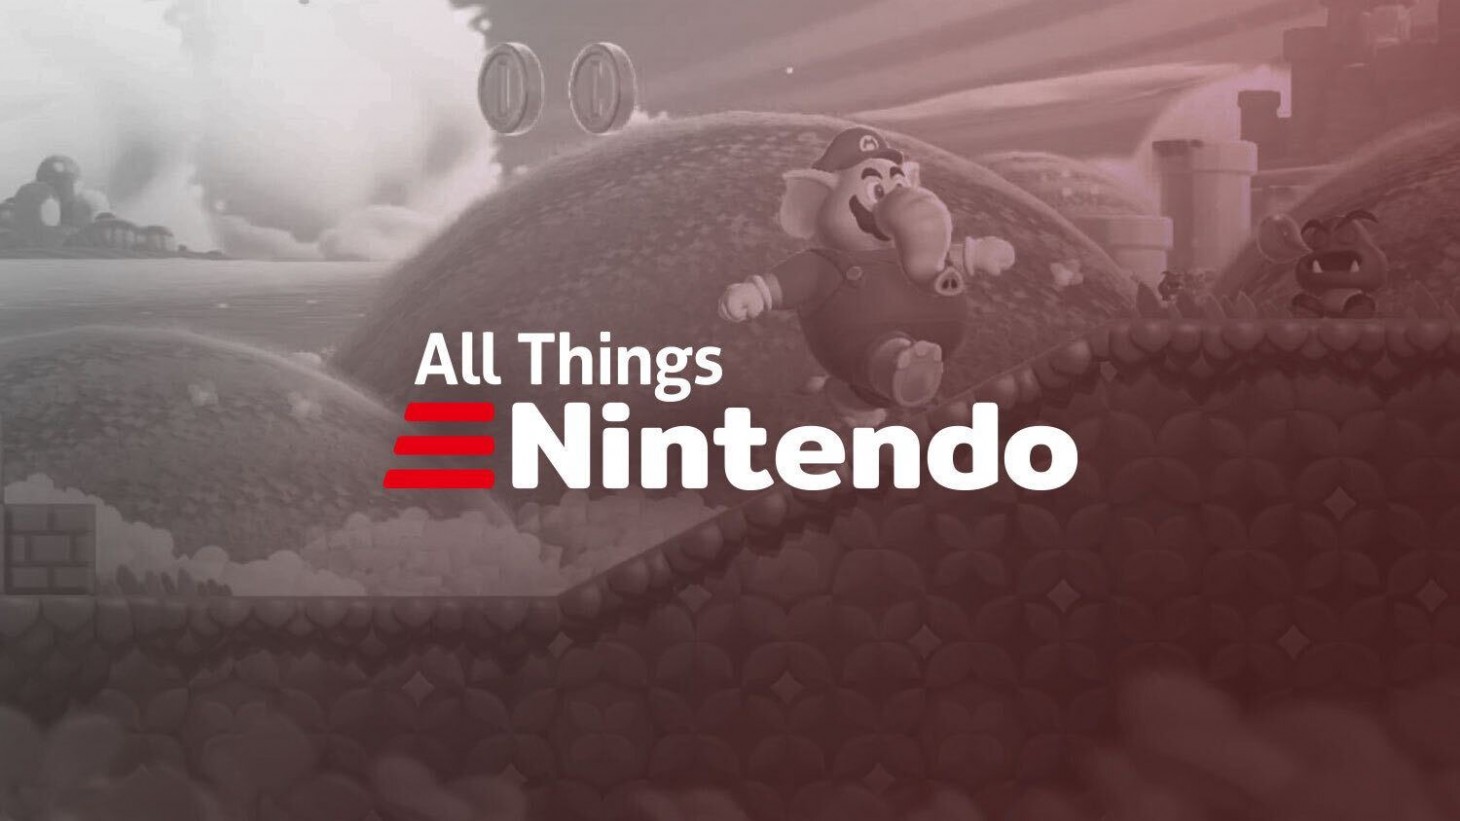 9 things we learned from the Super Mario Bros. Wonder Nintendo Direct